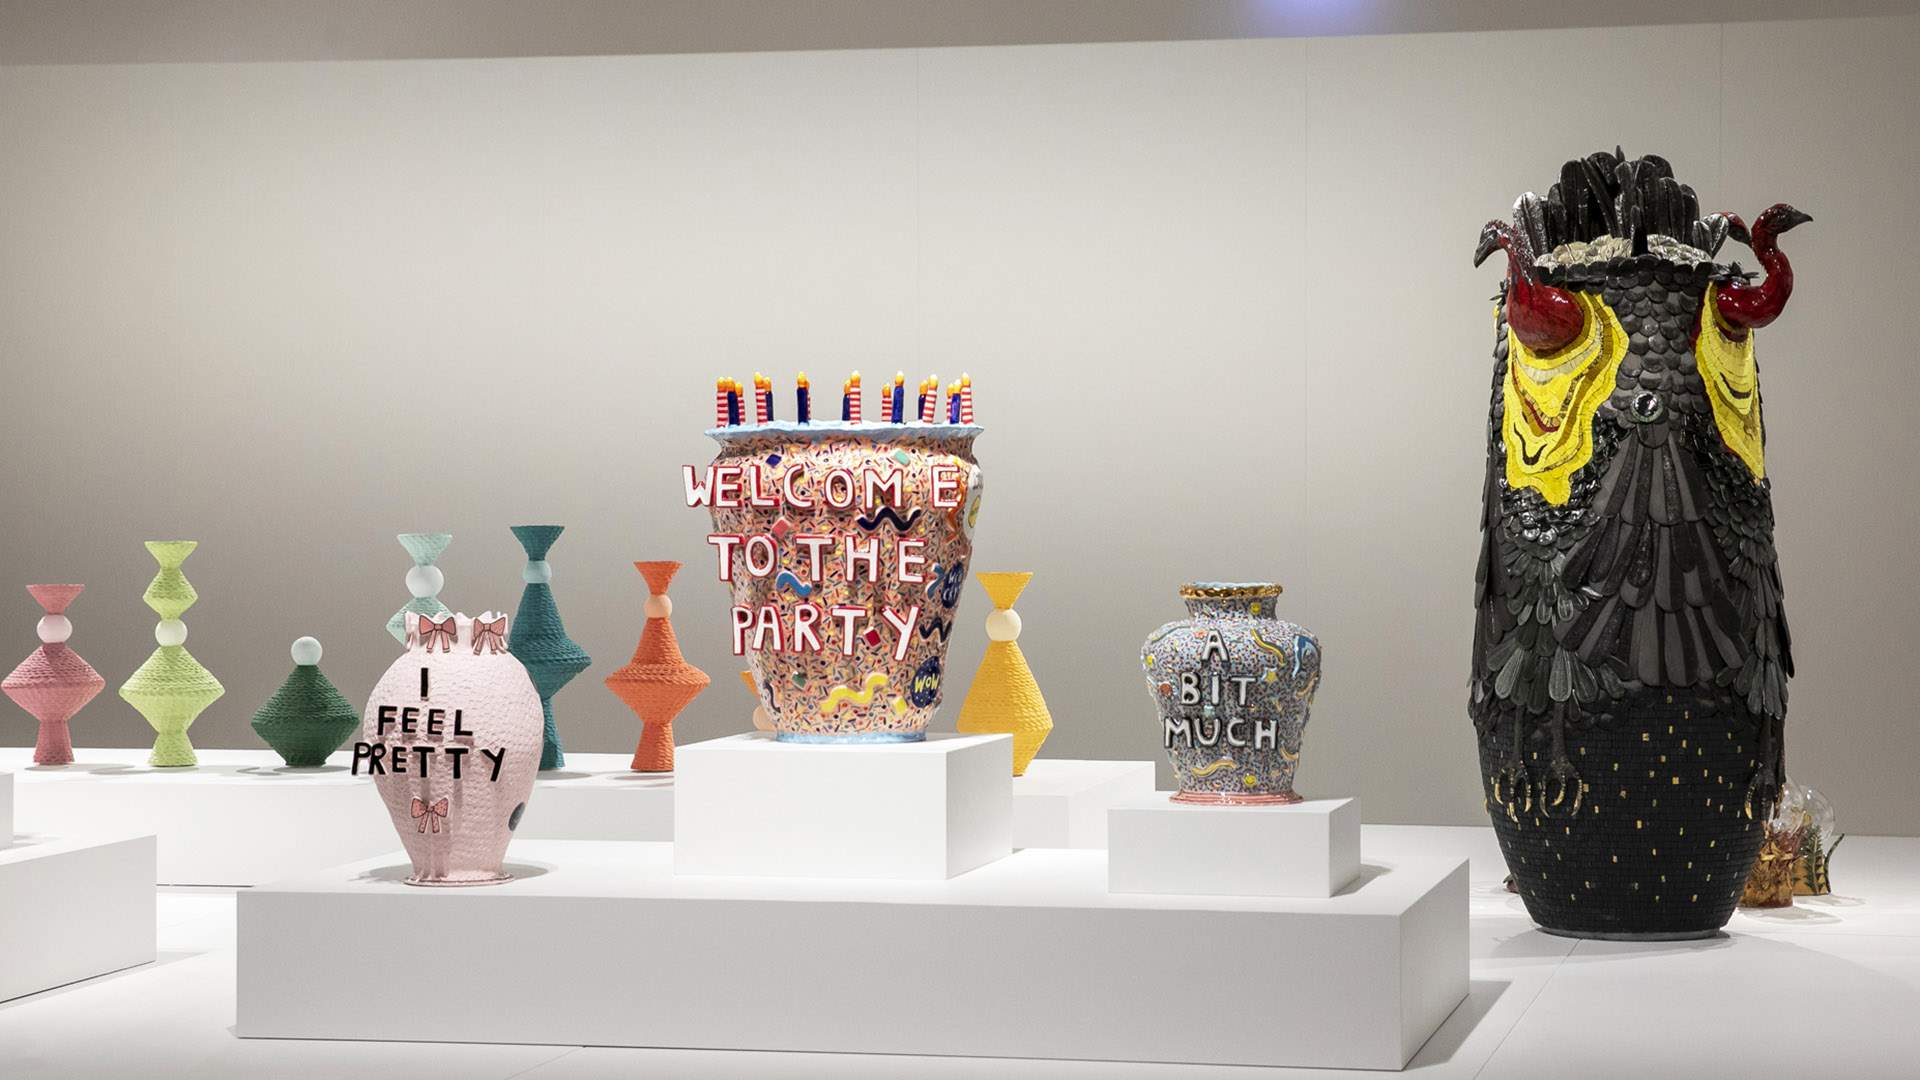 Museum of Brisbane's Latest Big (and Free) Exhibition Is All About Clay, Pottery and Ceramics